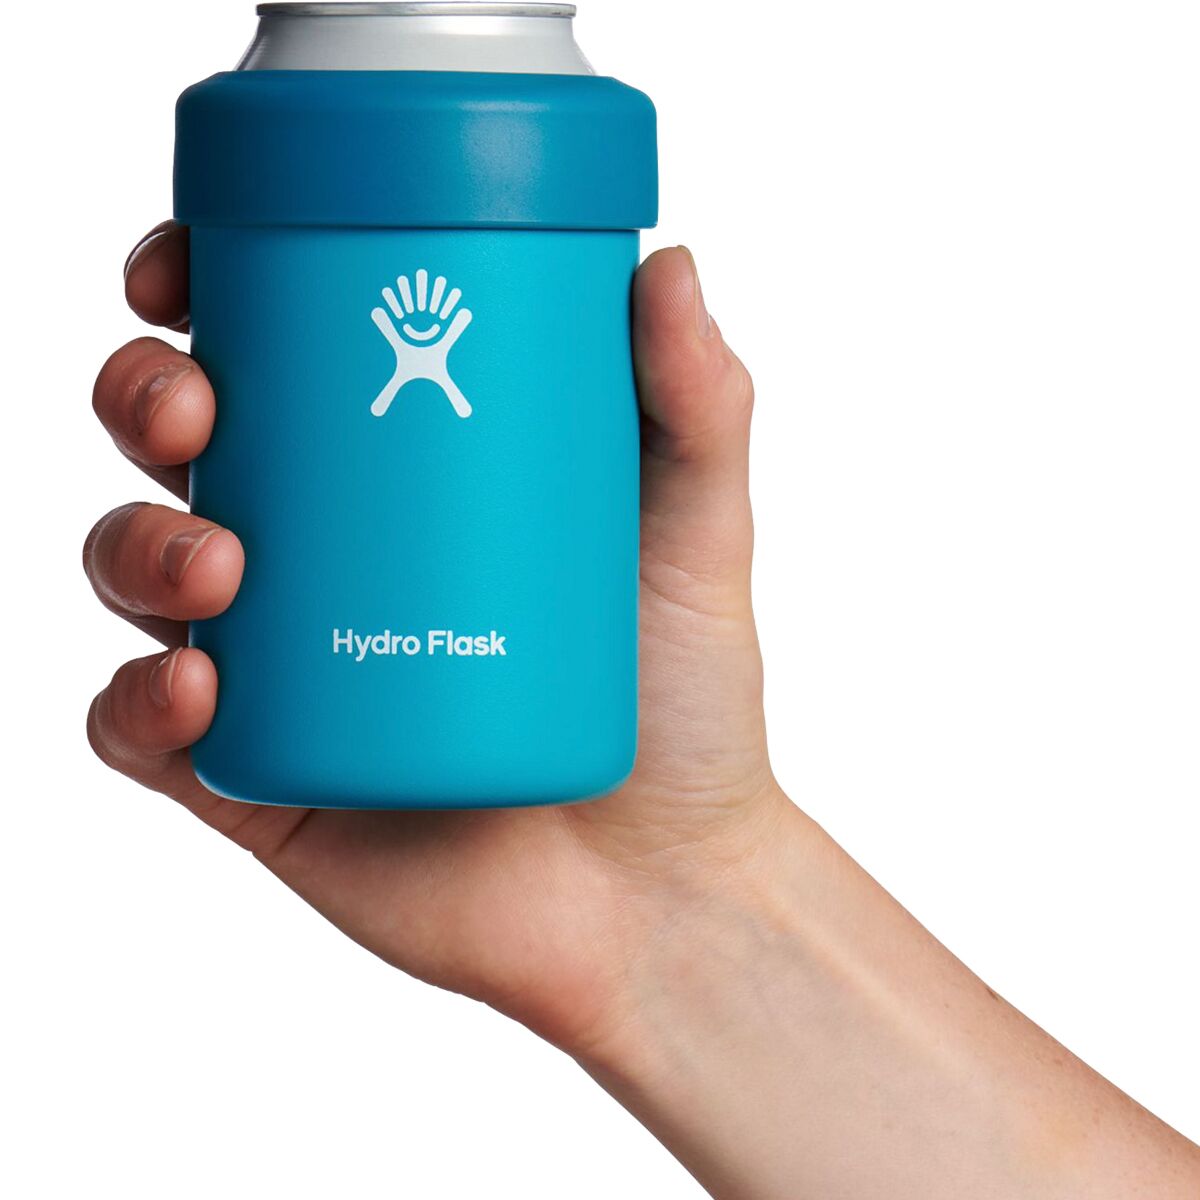 The Hydro Flask Cooler Cup is a life-saver for those hot summer